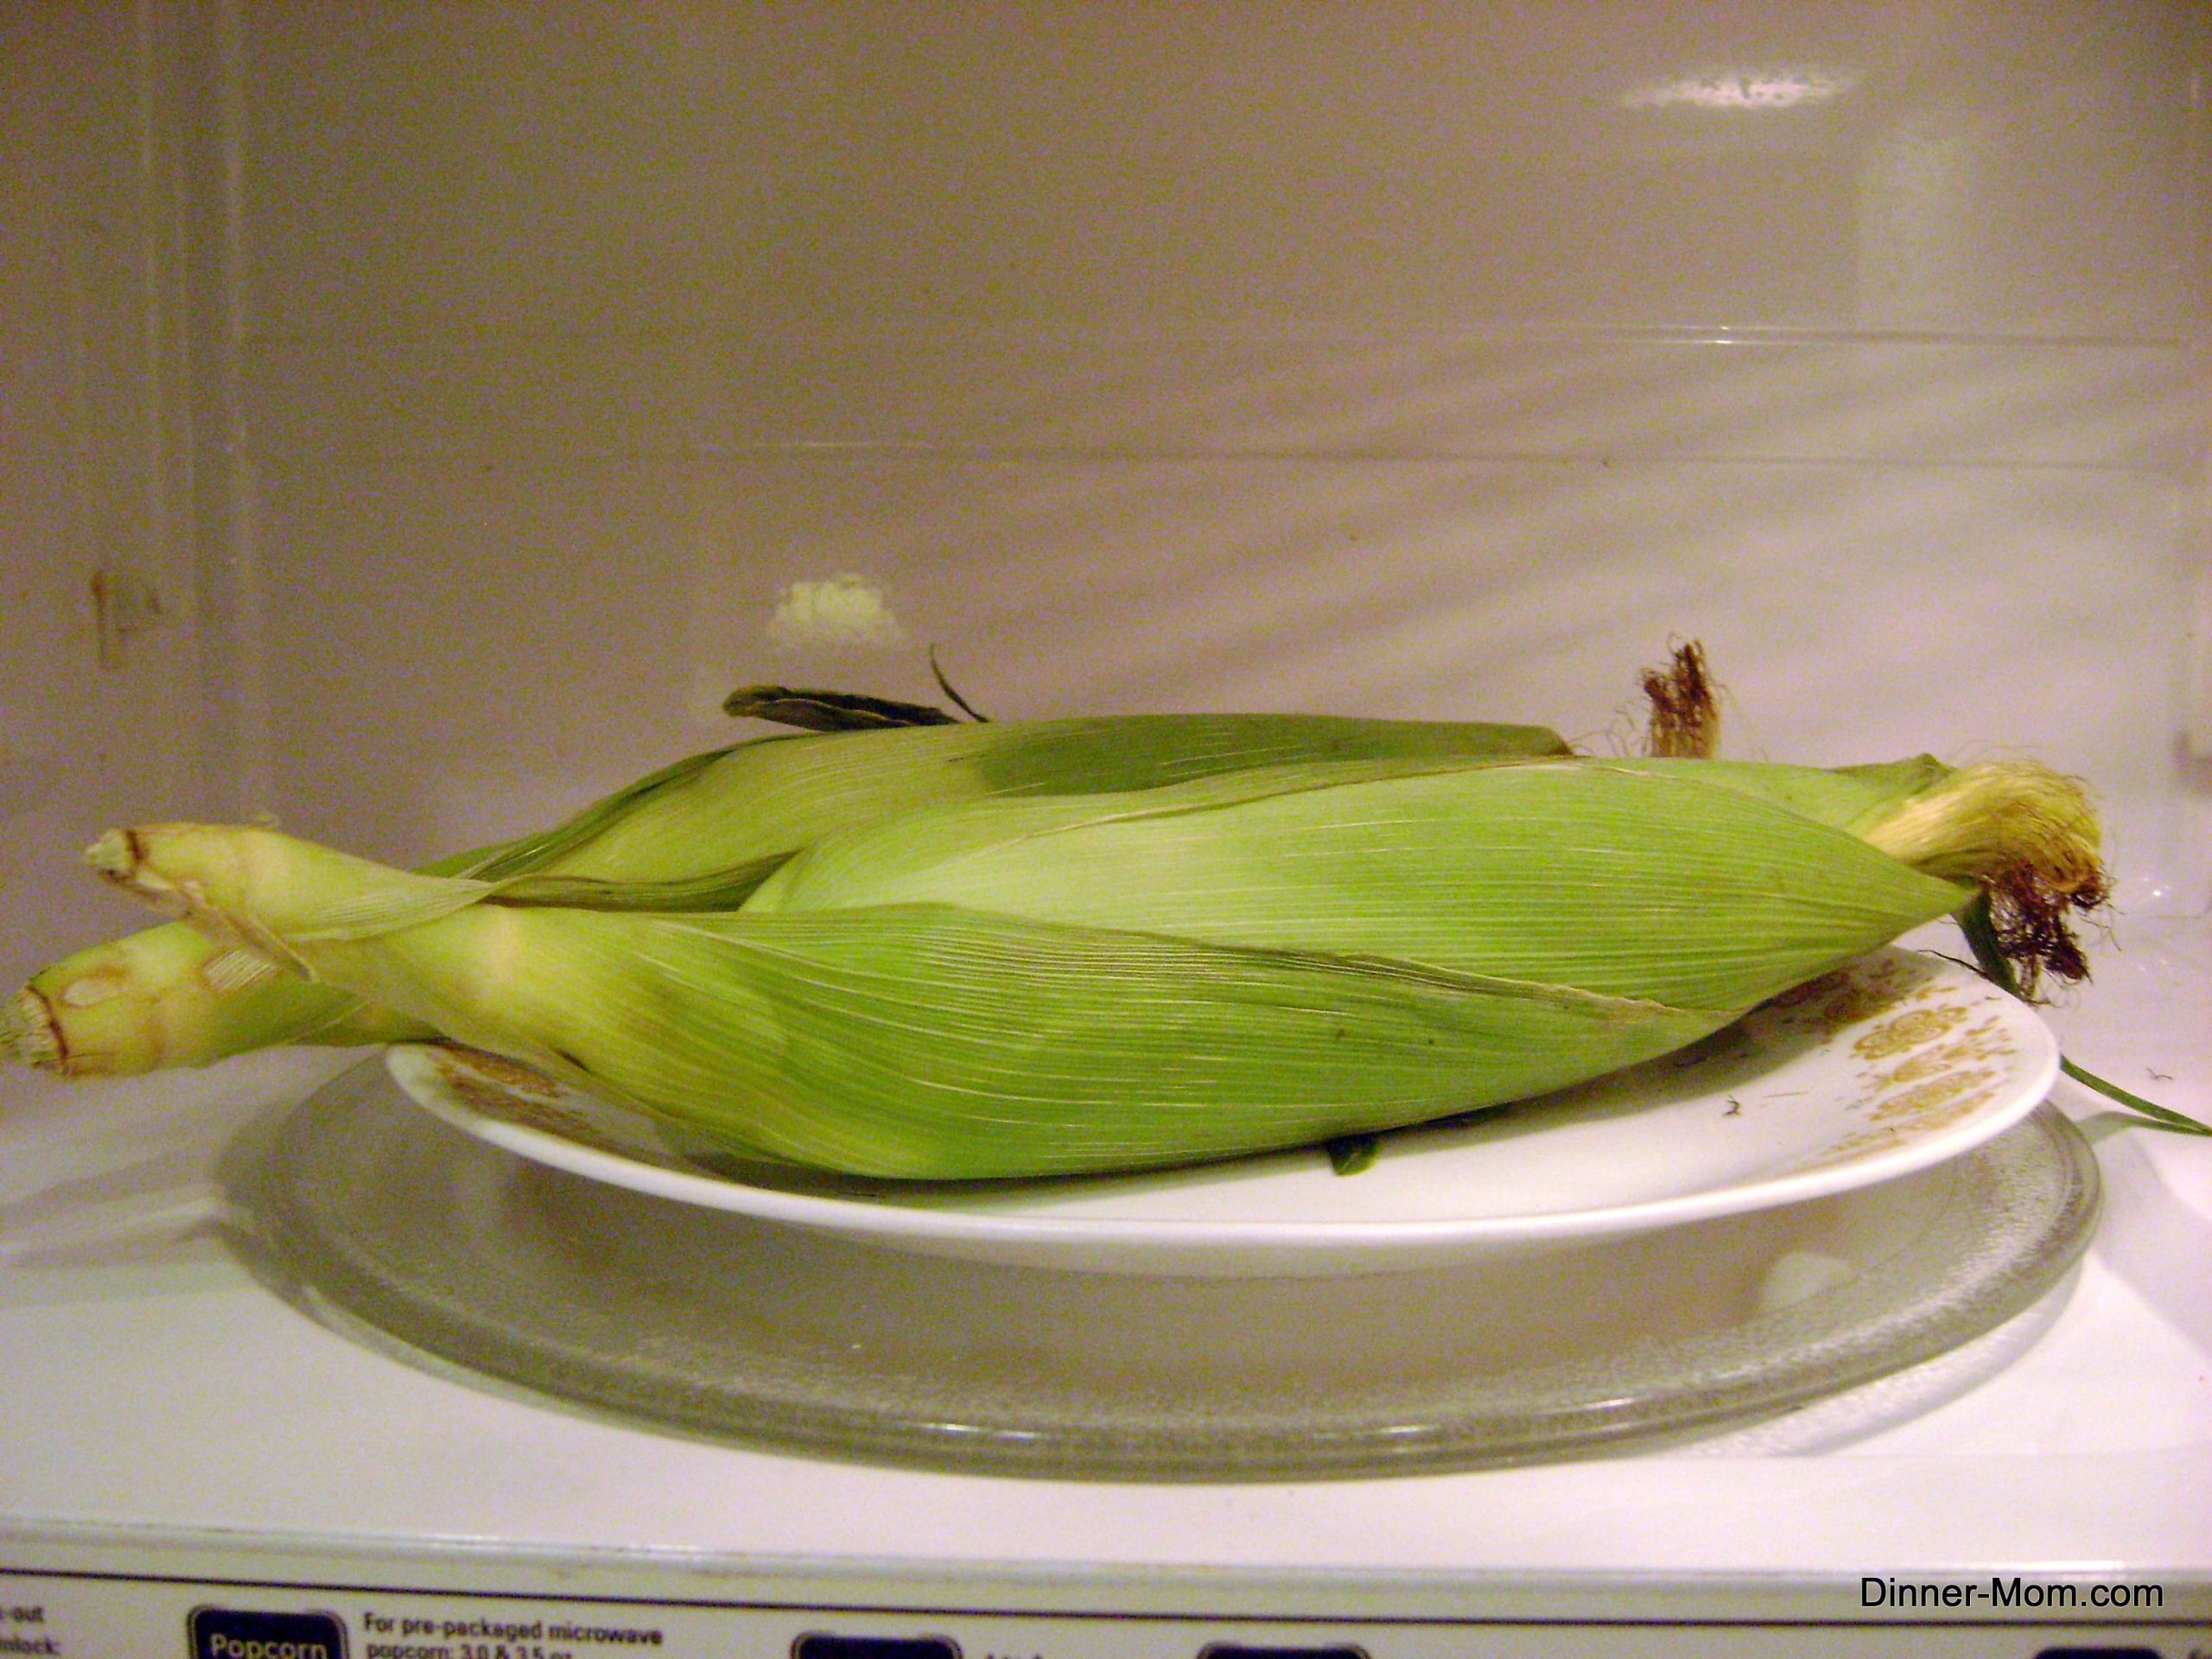 Microwave Corn On The Cob With Husk
 Microwave Corn on the Cob in Husk No Messy Silk The